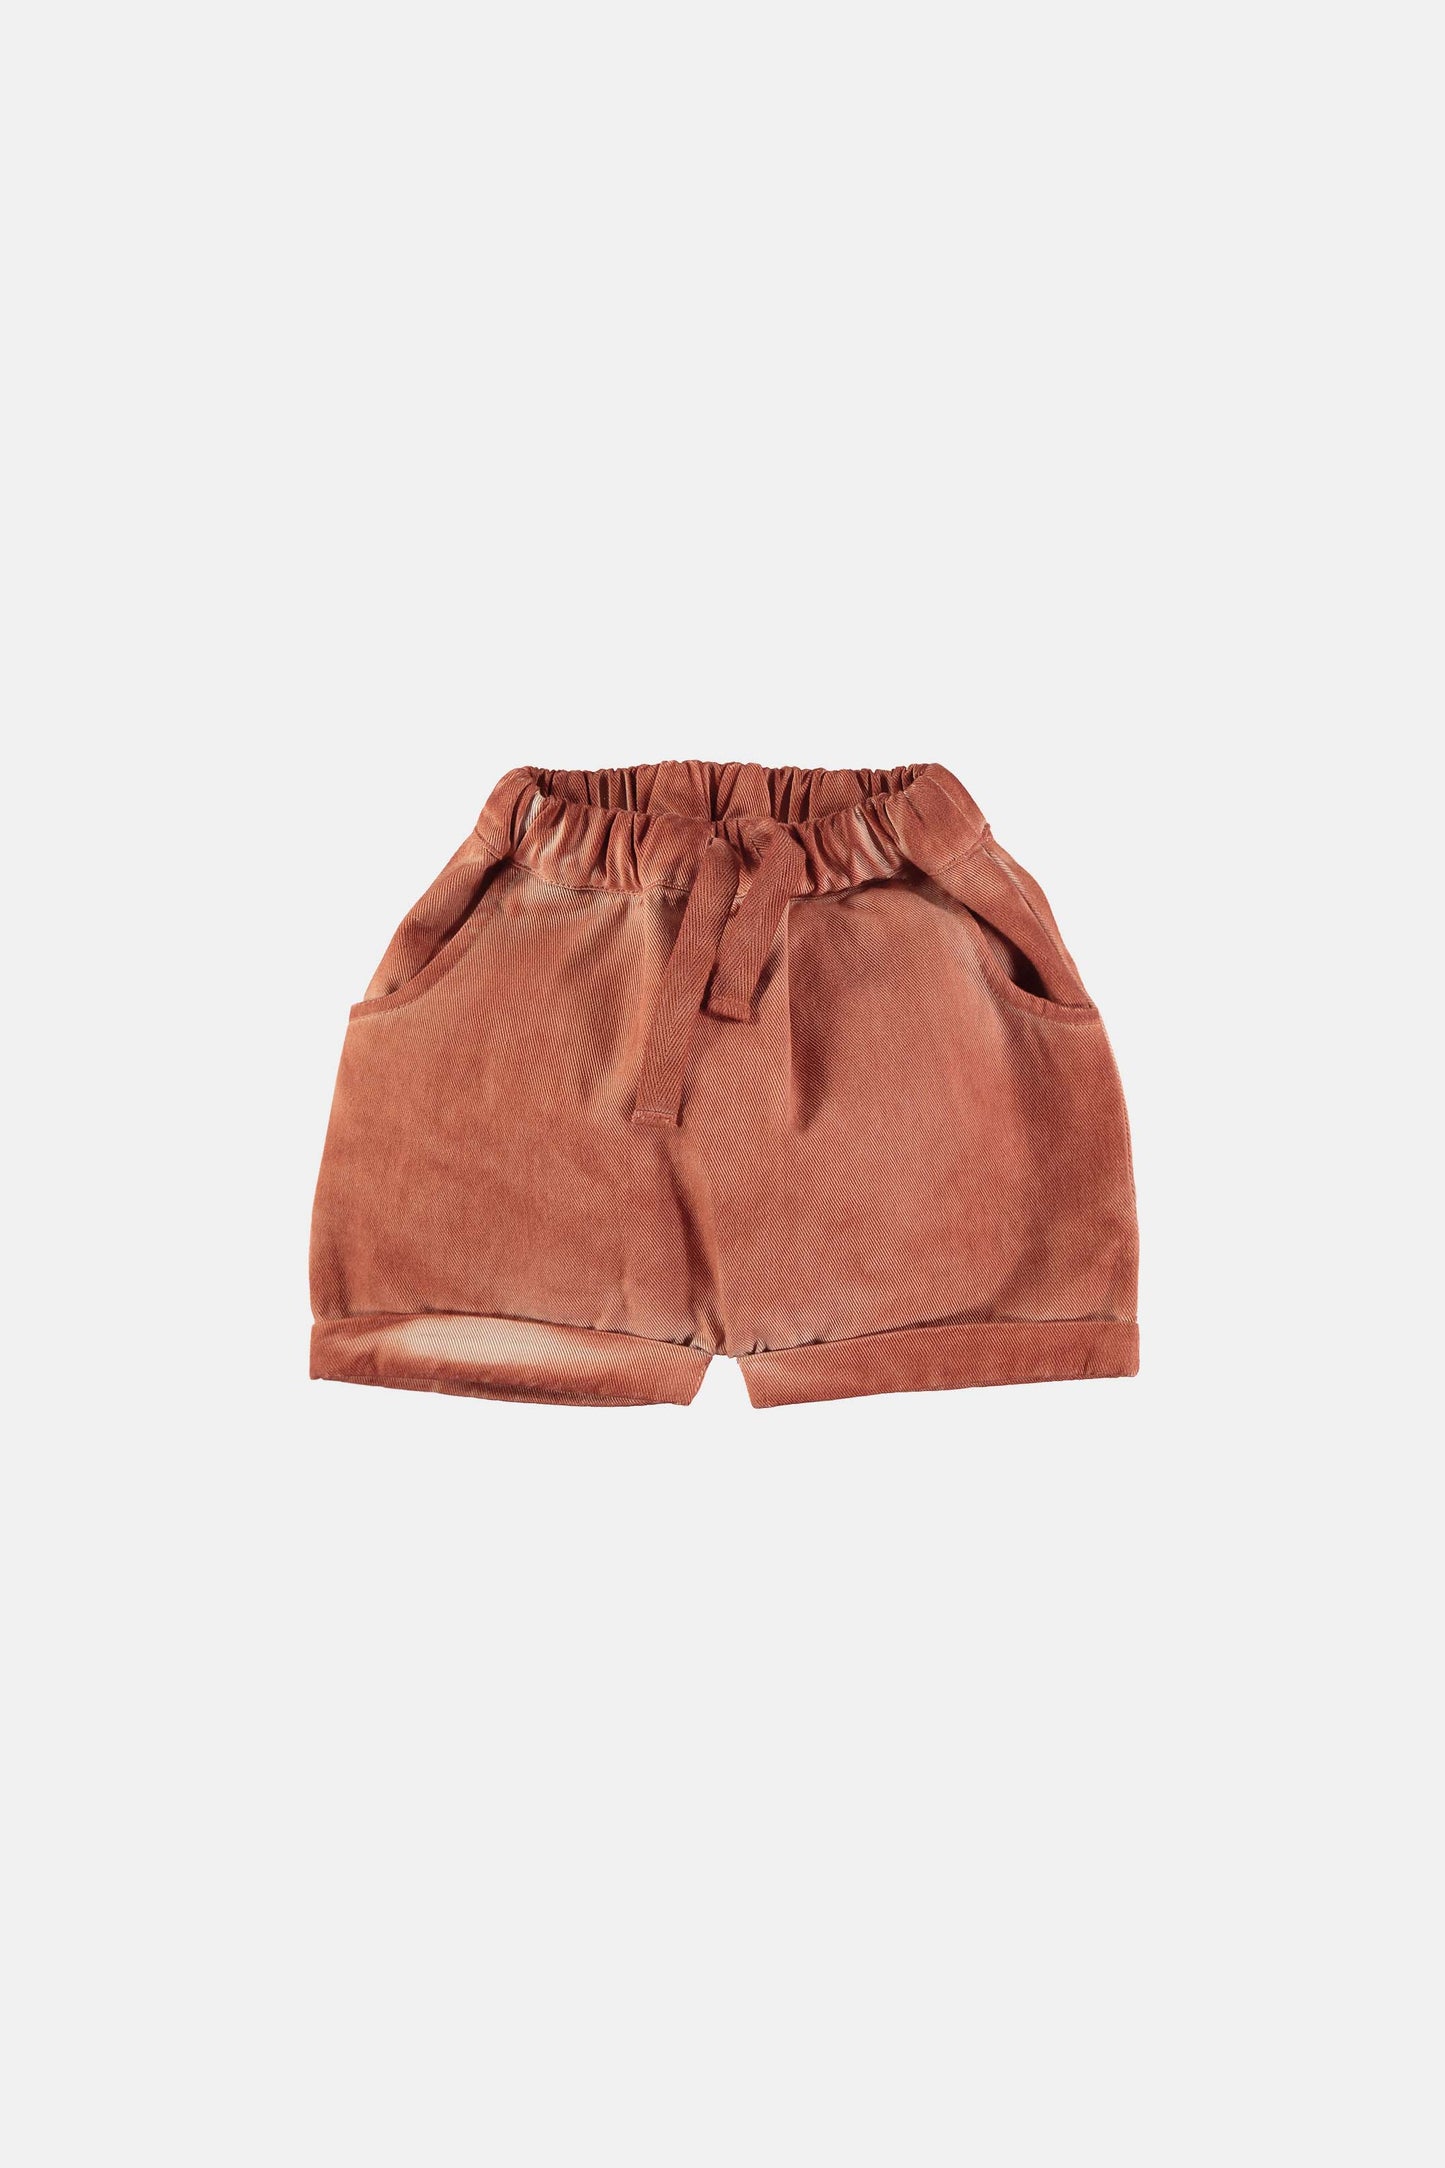 Washed tierra baby shorts Shorts Coco au lait 